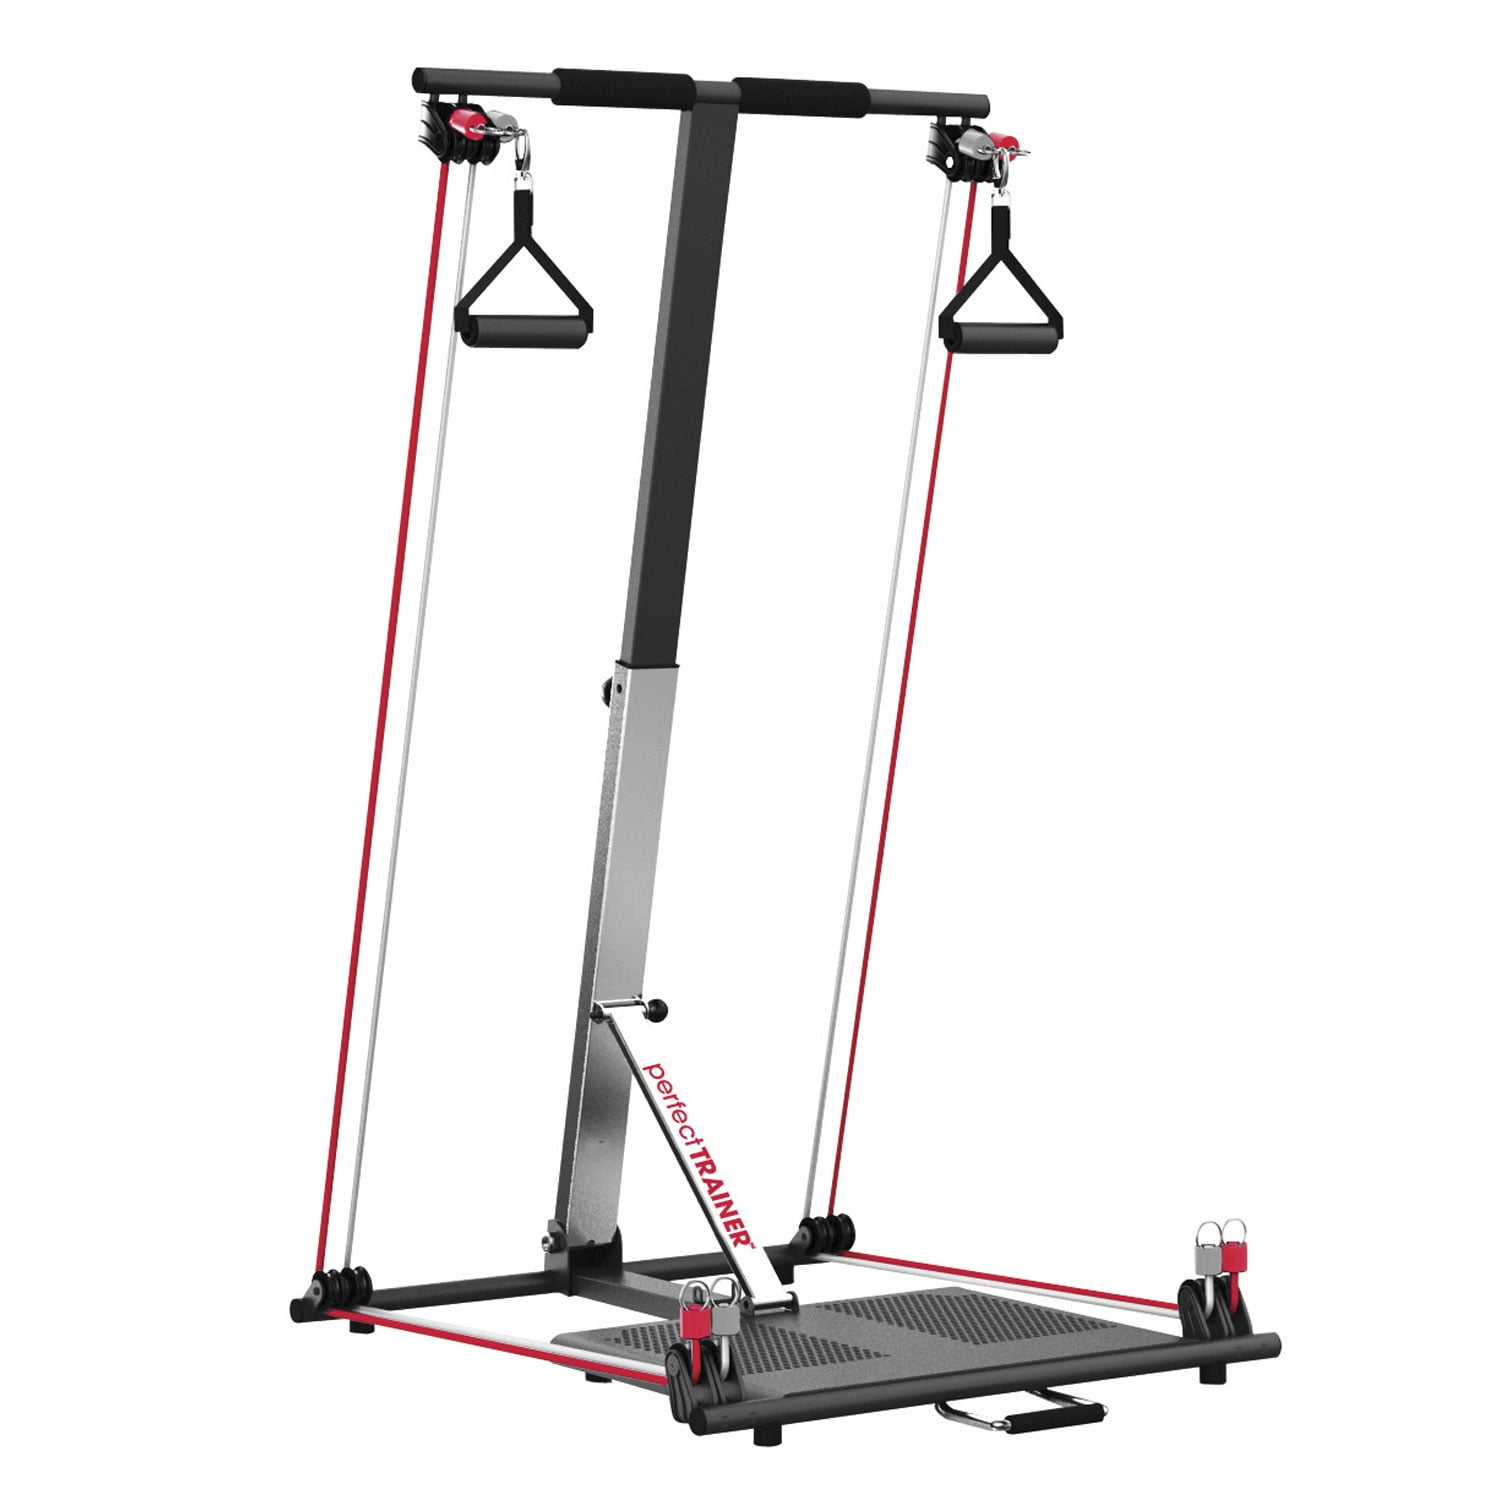 BodyBoss Home Gym 2.0 - Full Portable Gym Home Workout Package + 1 Set of  Resistance Bands - Collapsible Resistance Bar, Handles - Full Body Workouts  for Home, Travel or Outside - Green - Walmart.com